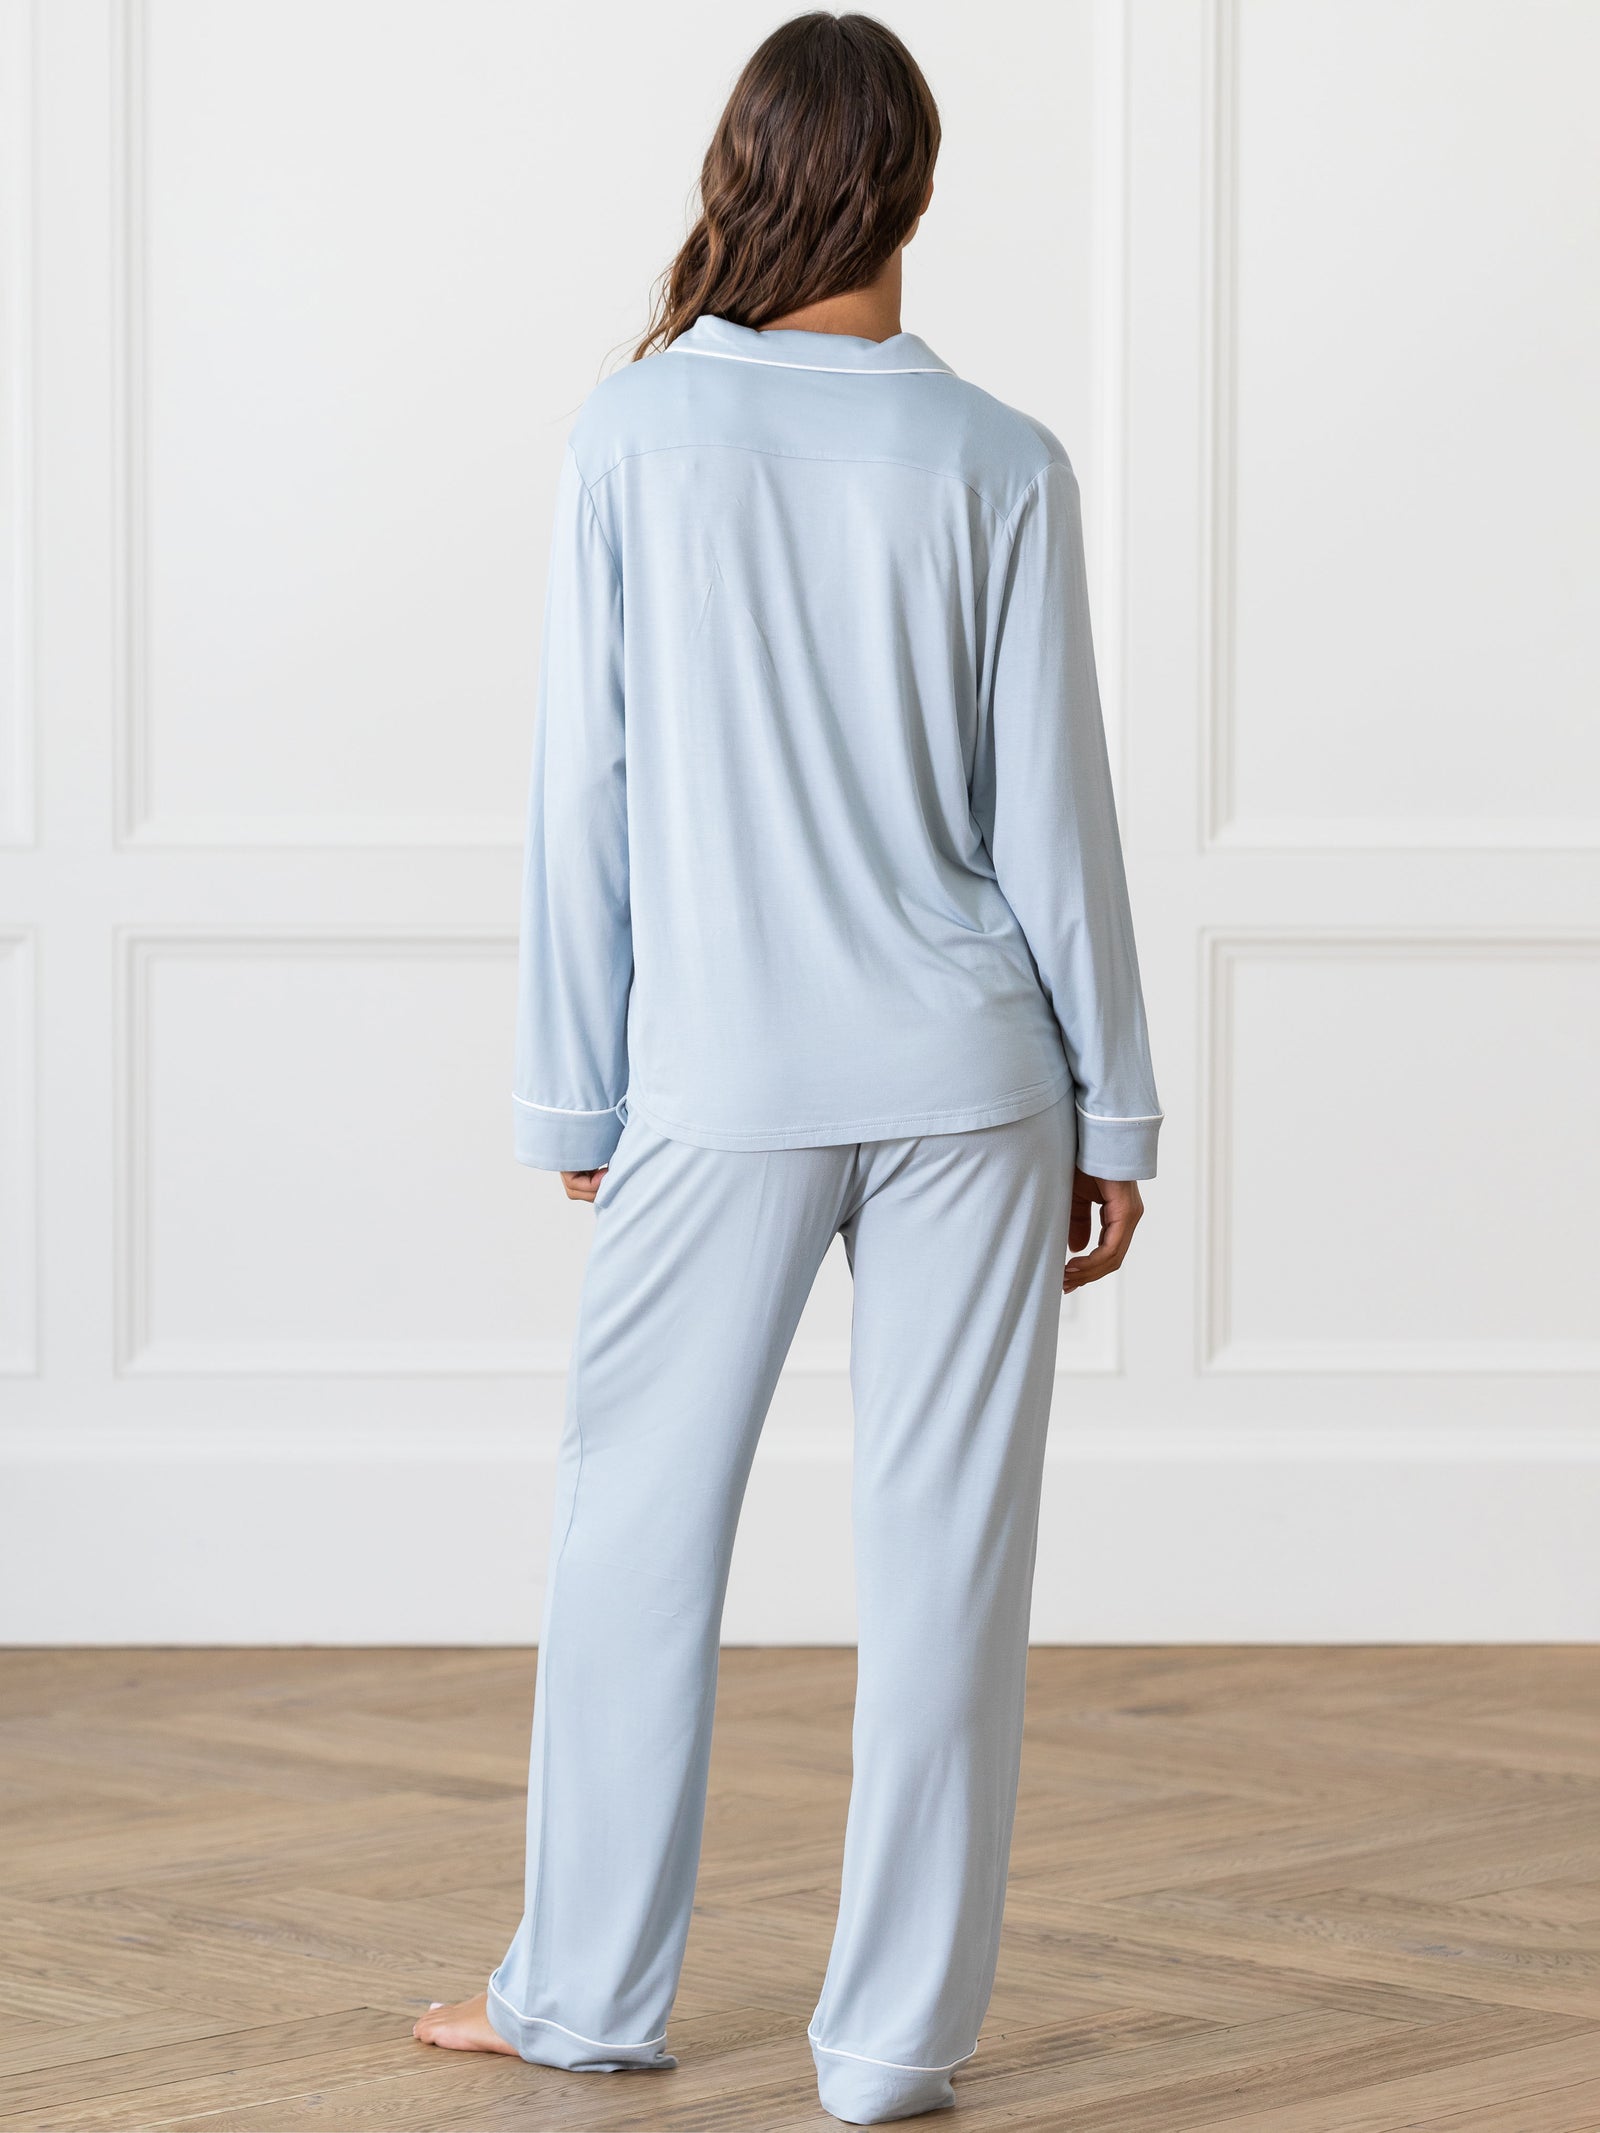 Powder Blue Long Sleeve Pajama Set modeled by a woman. The photo was taken in a high contrast setting, showing off the colors and lines of the pajamas. 